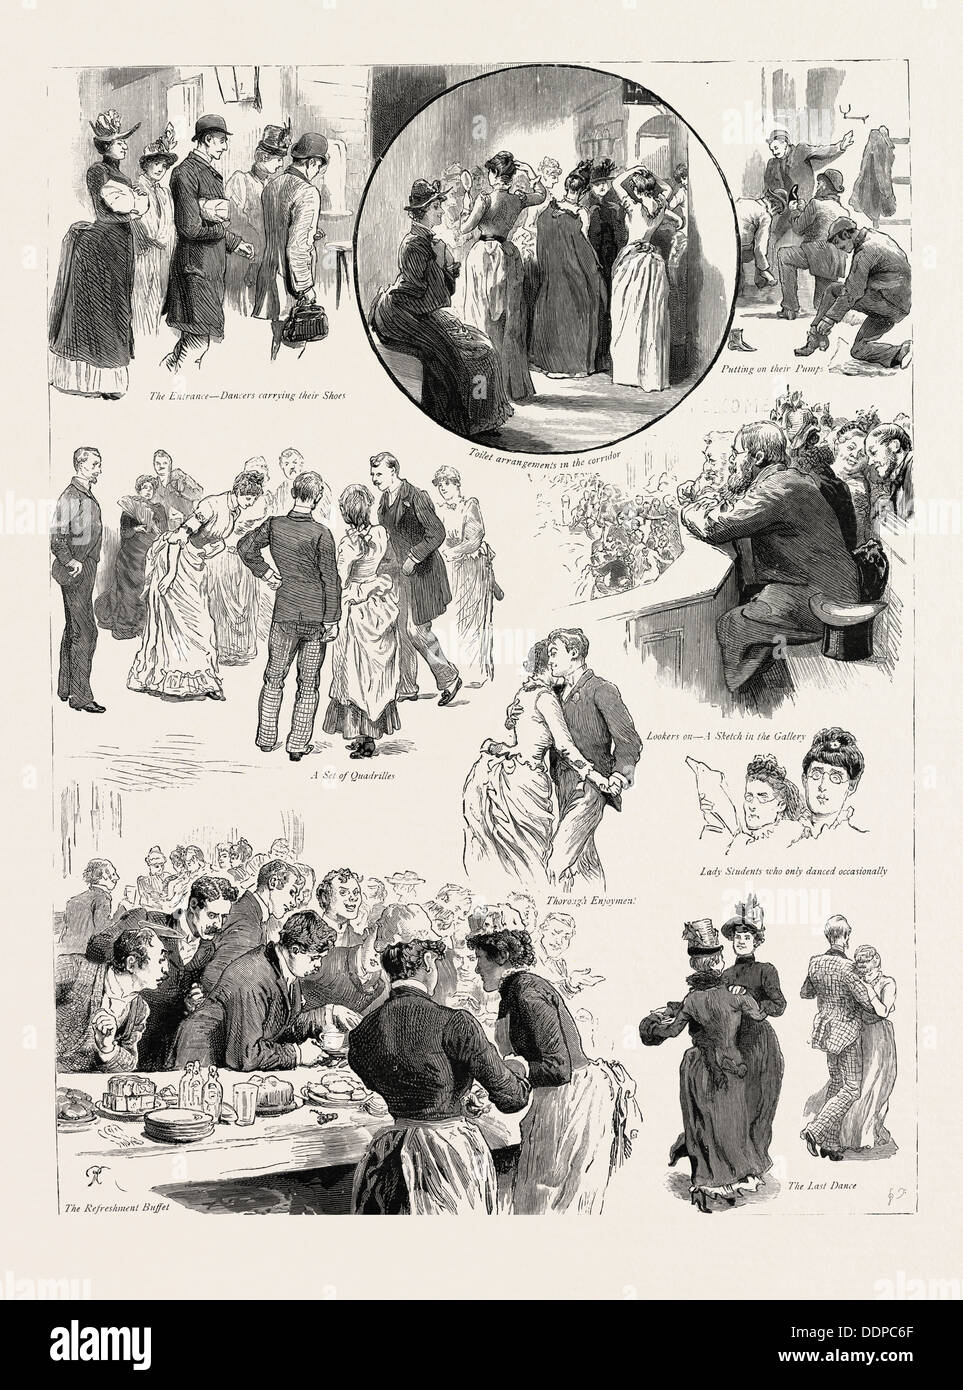 AMUSEMENTS AT THE PEOPLE'S PALACE, MILE END ROAD, A SUBSCRIPTION DANCE, LONDON, engraving 1890, UK, U.K., Britain, British Stock Photo